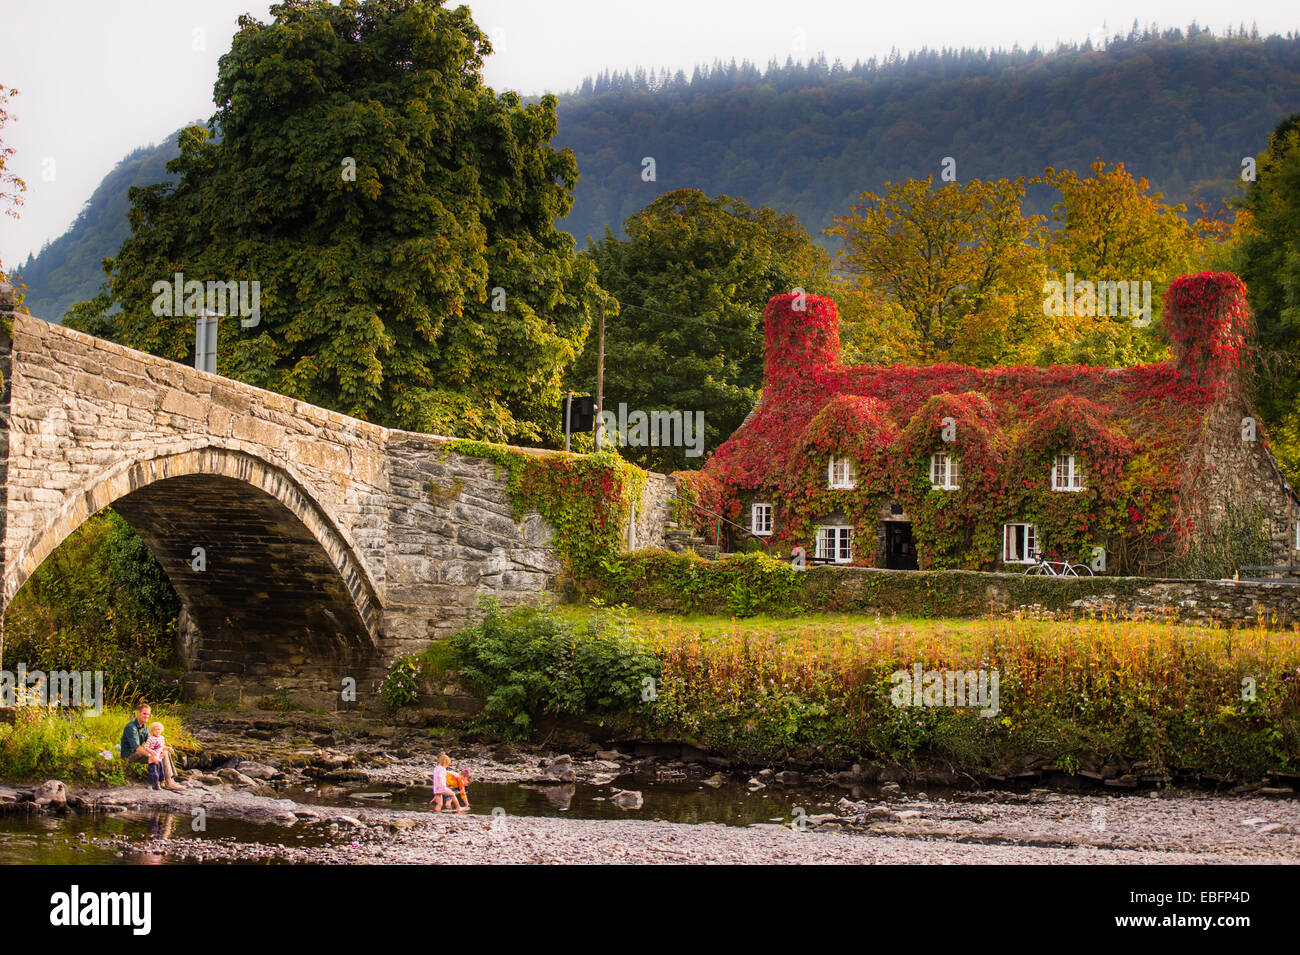 Autumn Colours: Tu Hwnt i'r Bont, riverside tearooms covered in red ivy, autumn september 2014, River Conwy, Llanrwst Wales UK Stock Photo